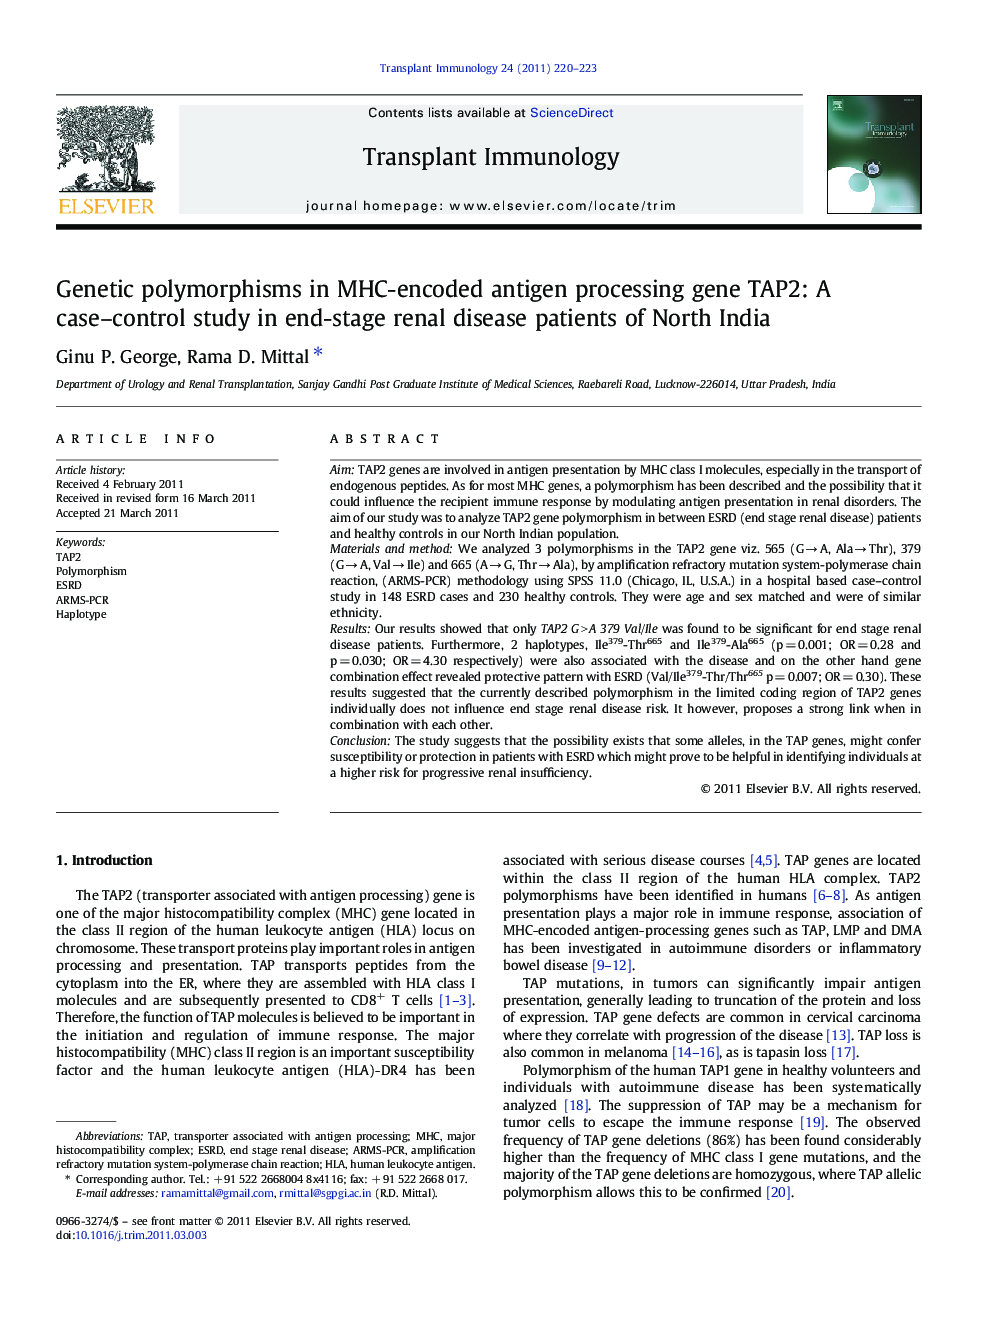 Genetic polymorphisms in MHC-encoded antigen processing gene TAP2: A case–control study in end-stage renal disease patients of North India